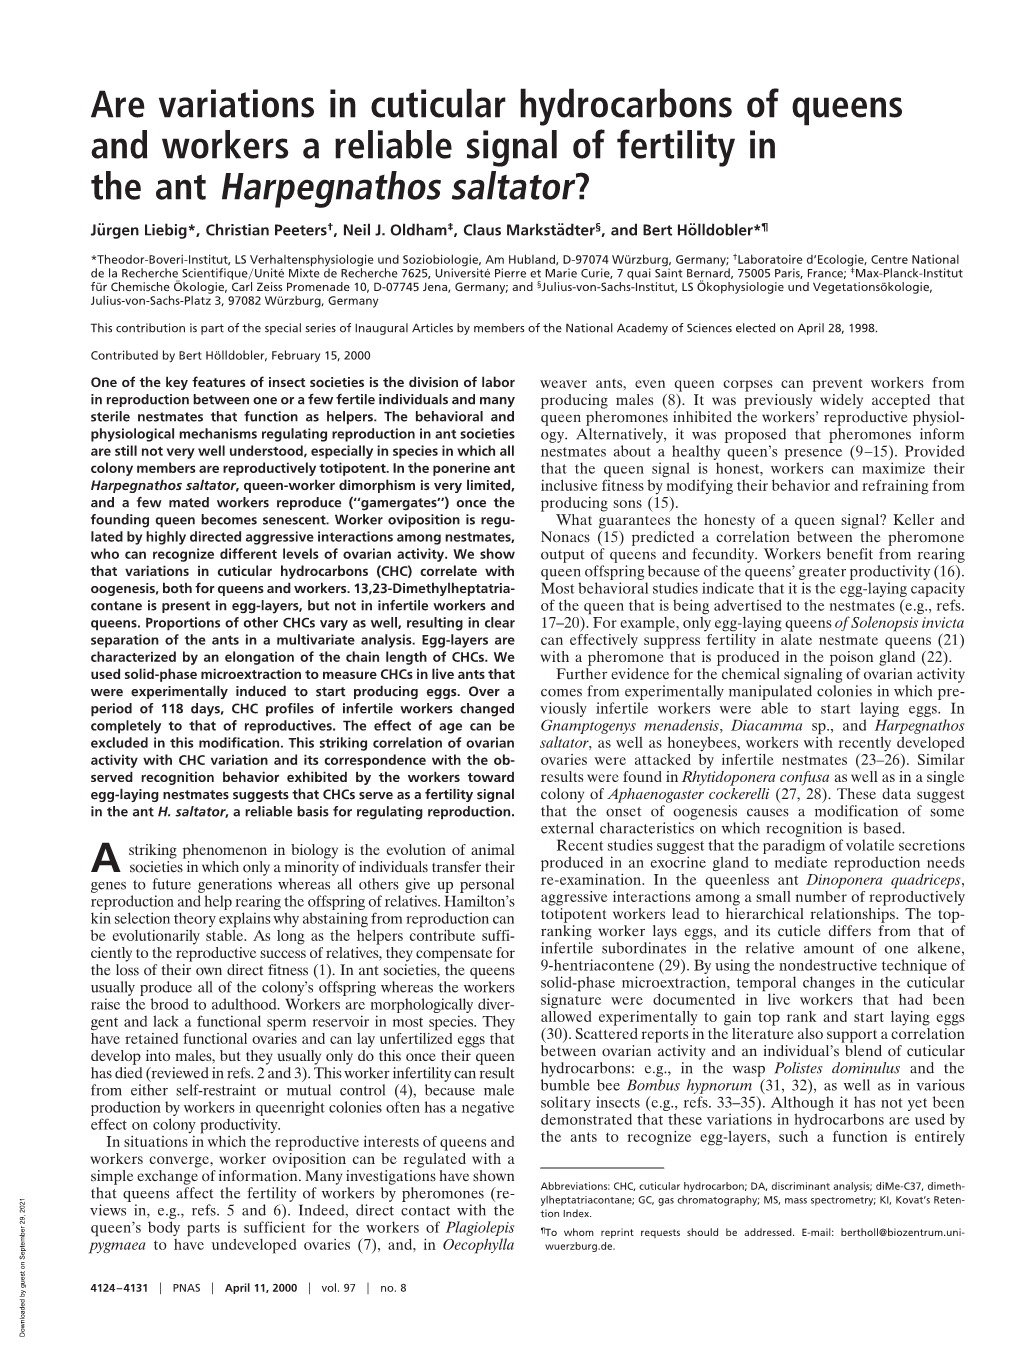 Are Variations in Cuticular Hydrocarbons of Queens and Workers a Reliable Signal of Fertility in the Ant Harpegnathos Saltator?